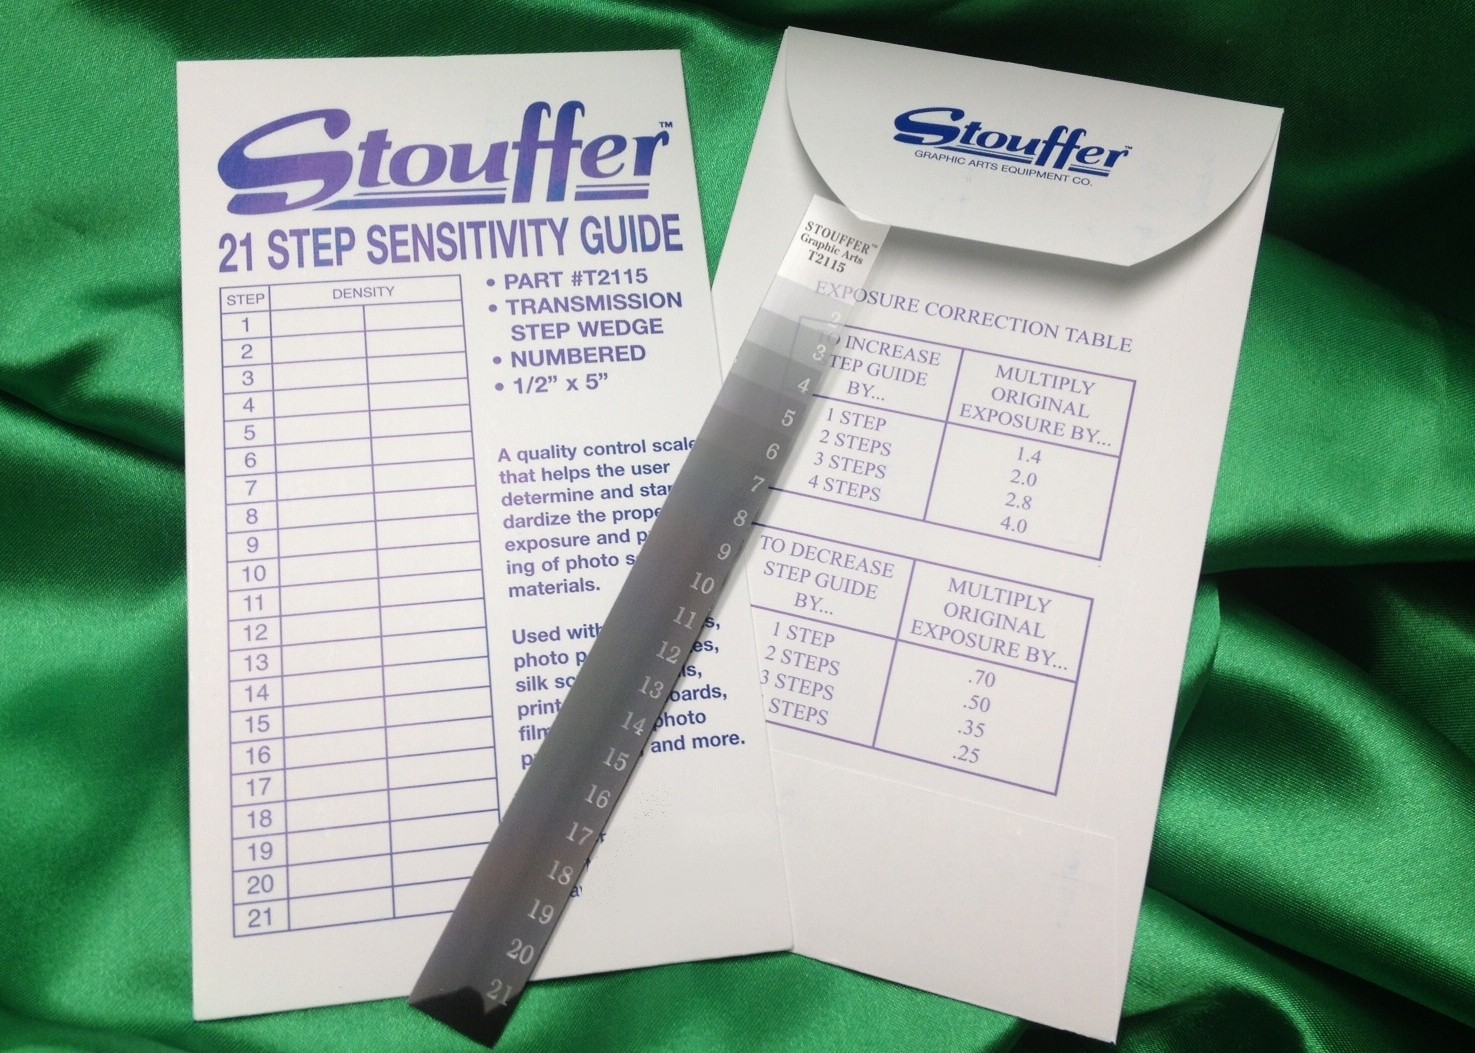 Stouffer's 21 Step Screen Exposure Guide